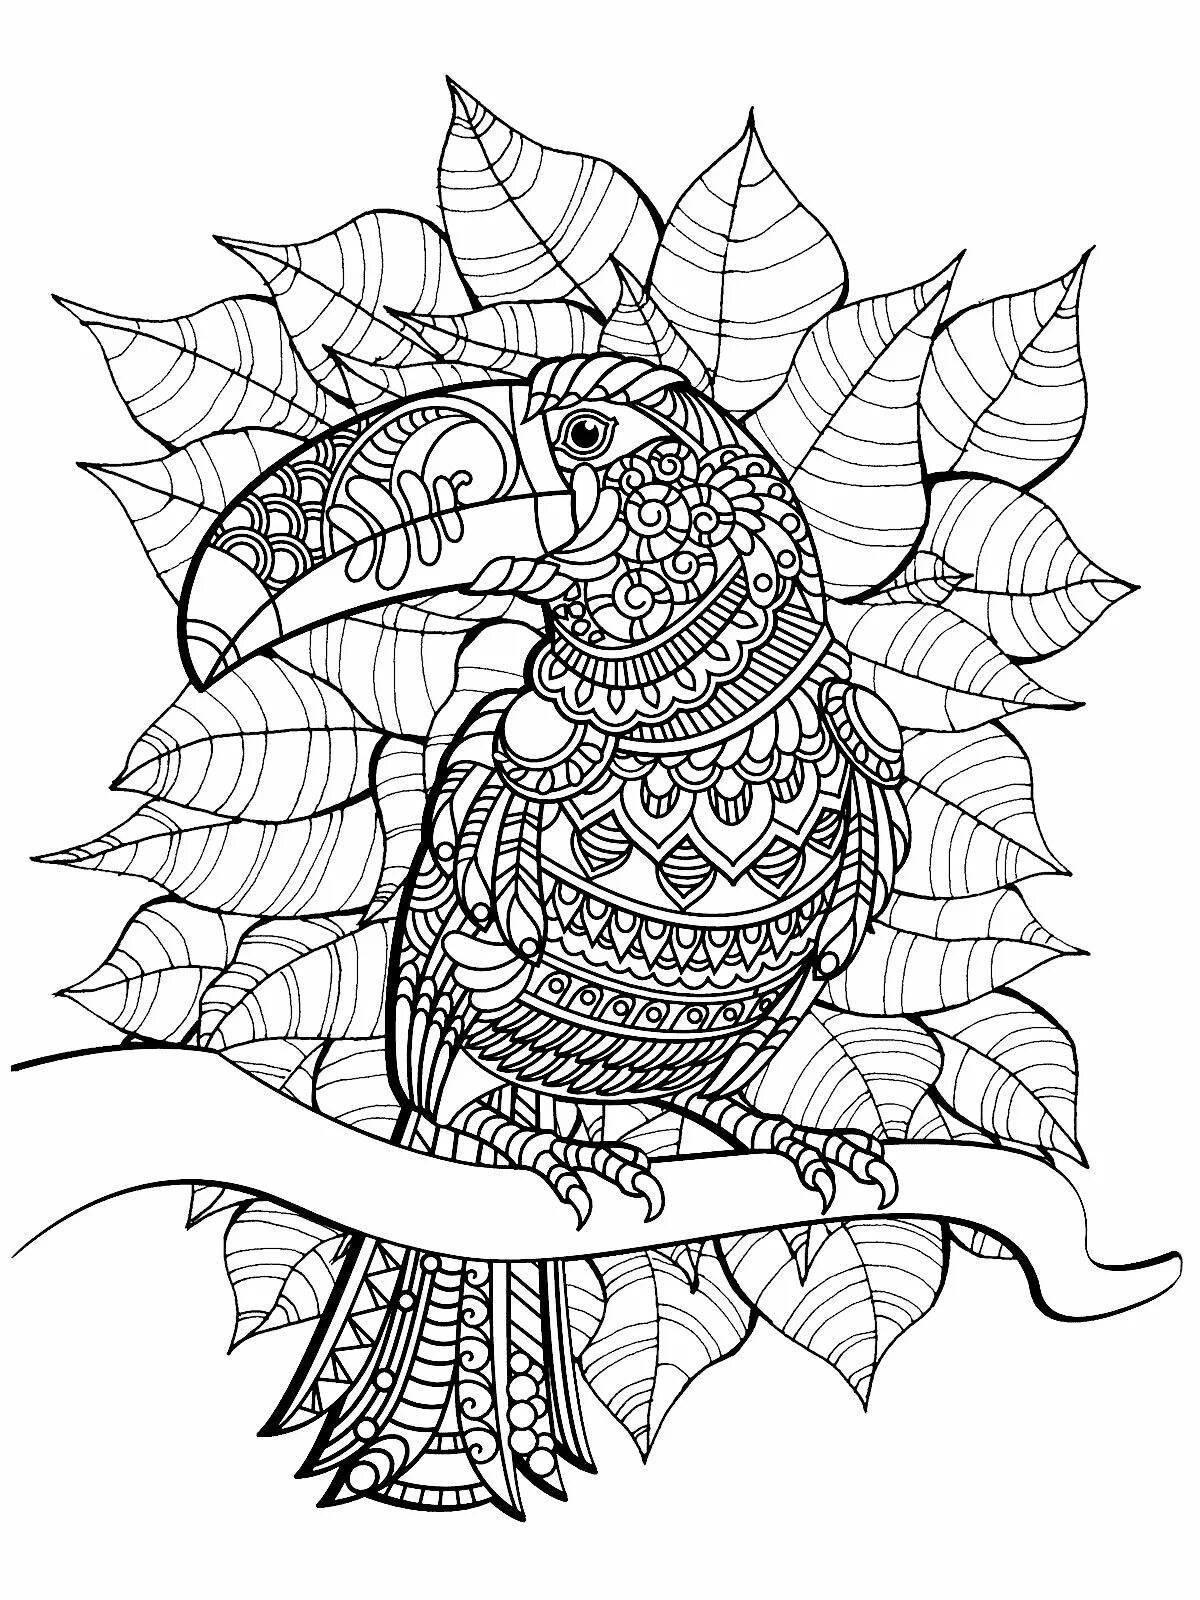 Knotted printable coloring book